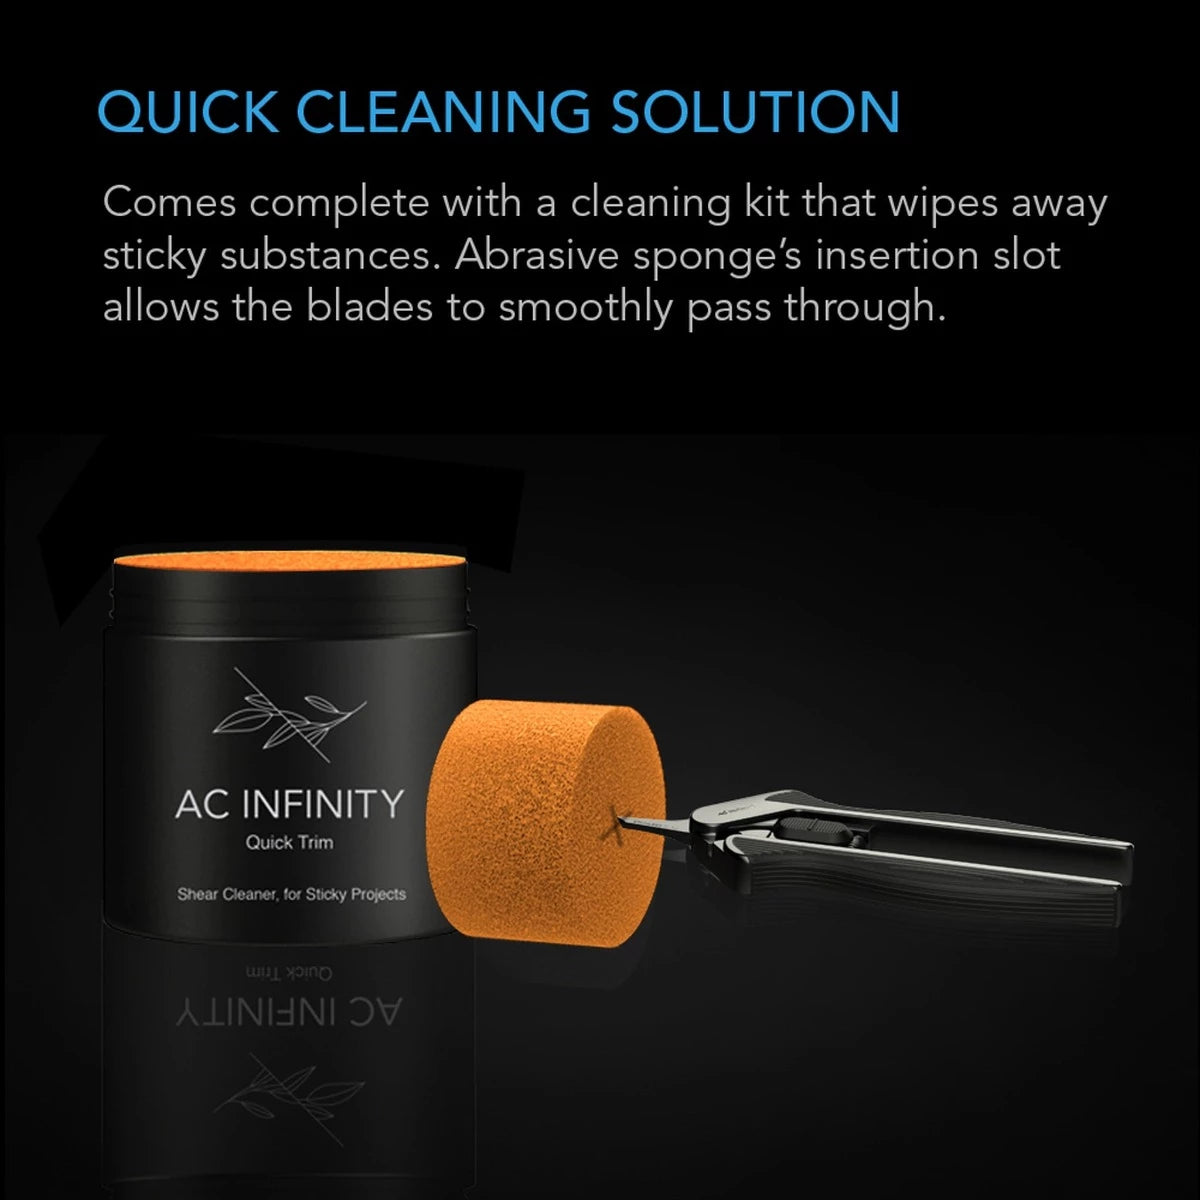 AC Infinity Pruning Shear and Cleaning kit